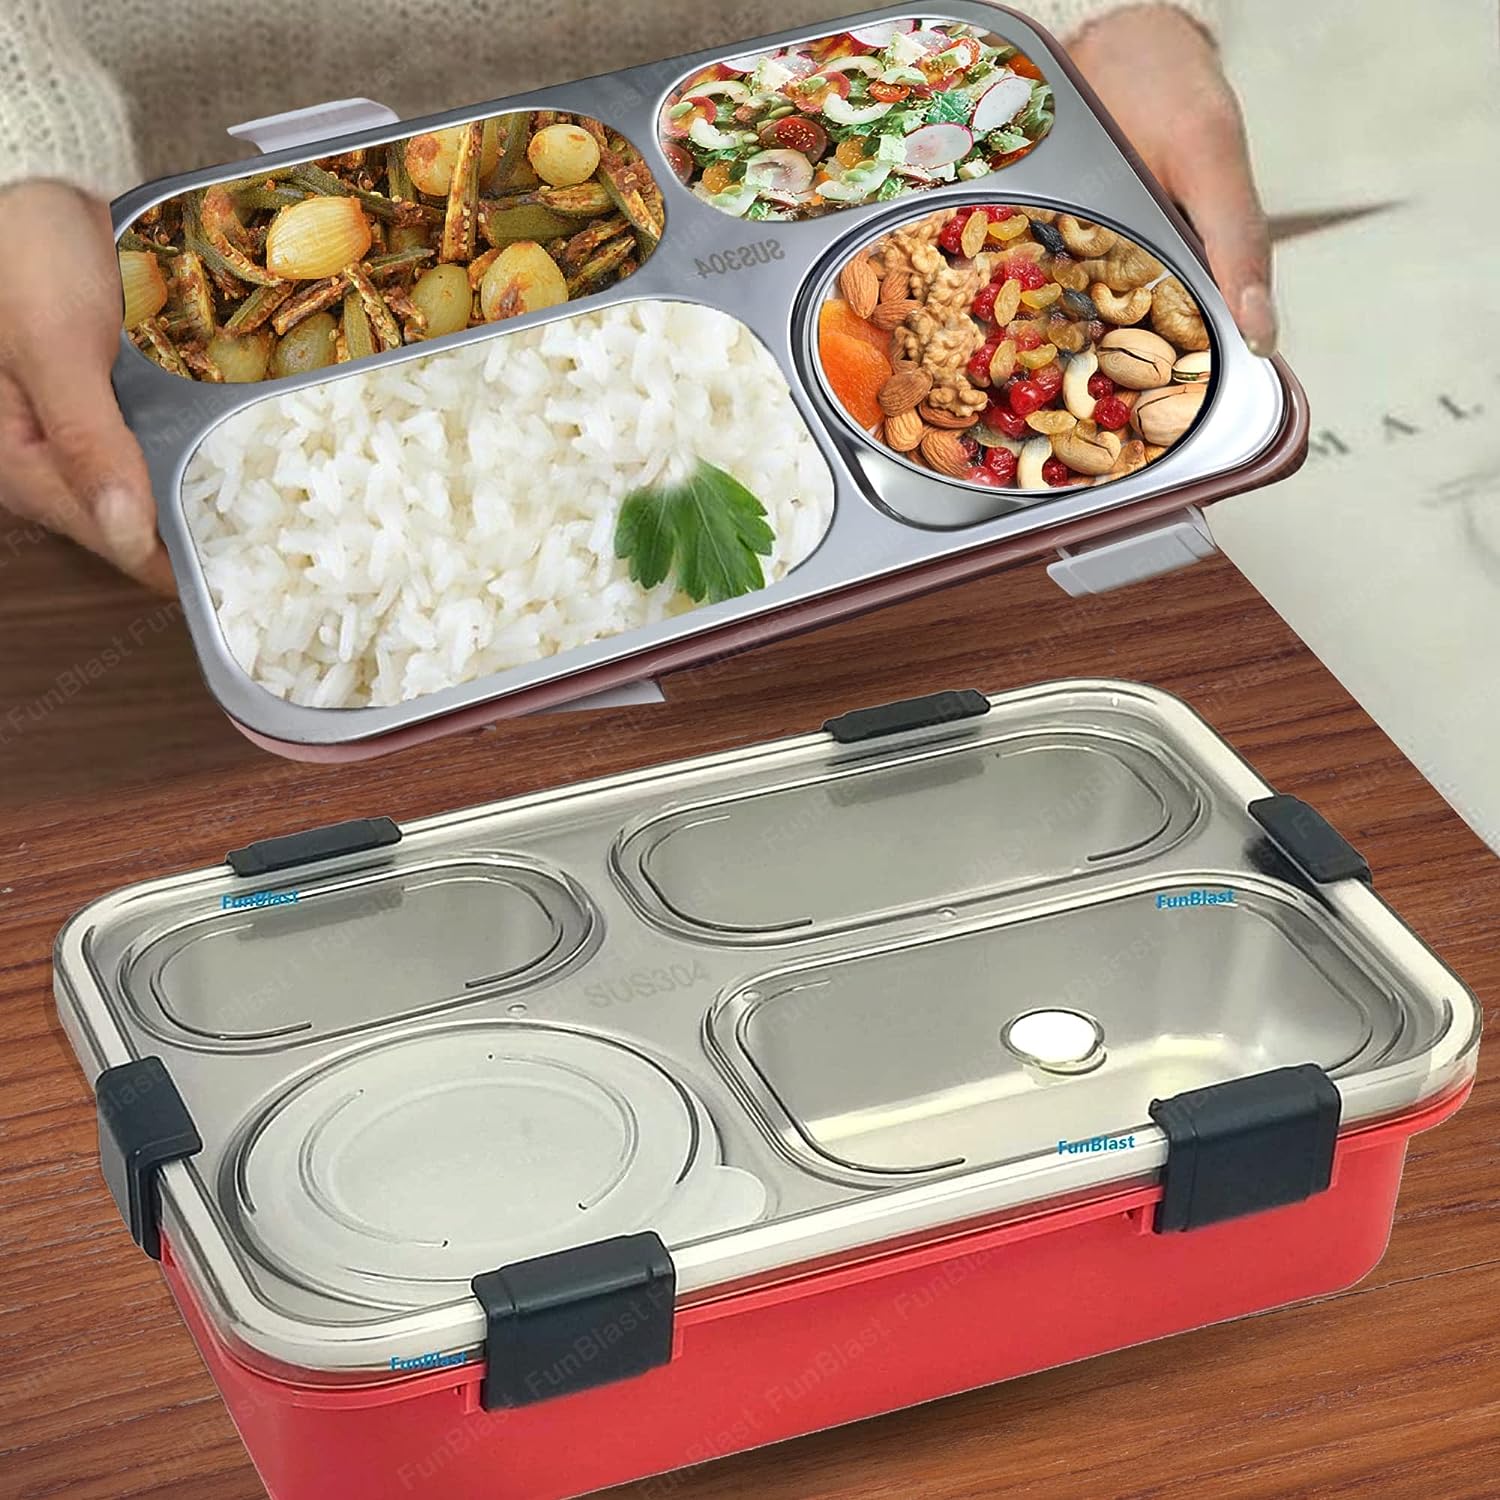 Lunch Box - Stainless Steel Lunch Box for Kids, Tiffin Box, Lunch Box with Spoon and Fork, Bento Lunch Box, Lunch Box for Kids, Insulated Lunch Box, Lunch Box for Office Women & Men (Not Leak-Proof - for Dry Foods Only)